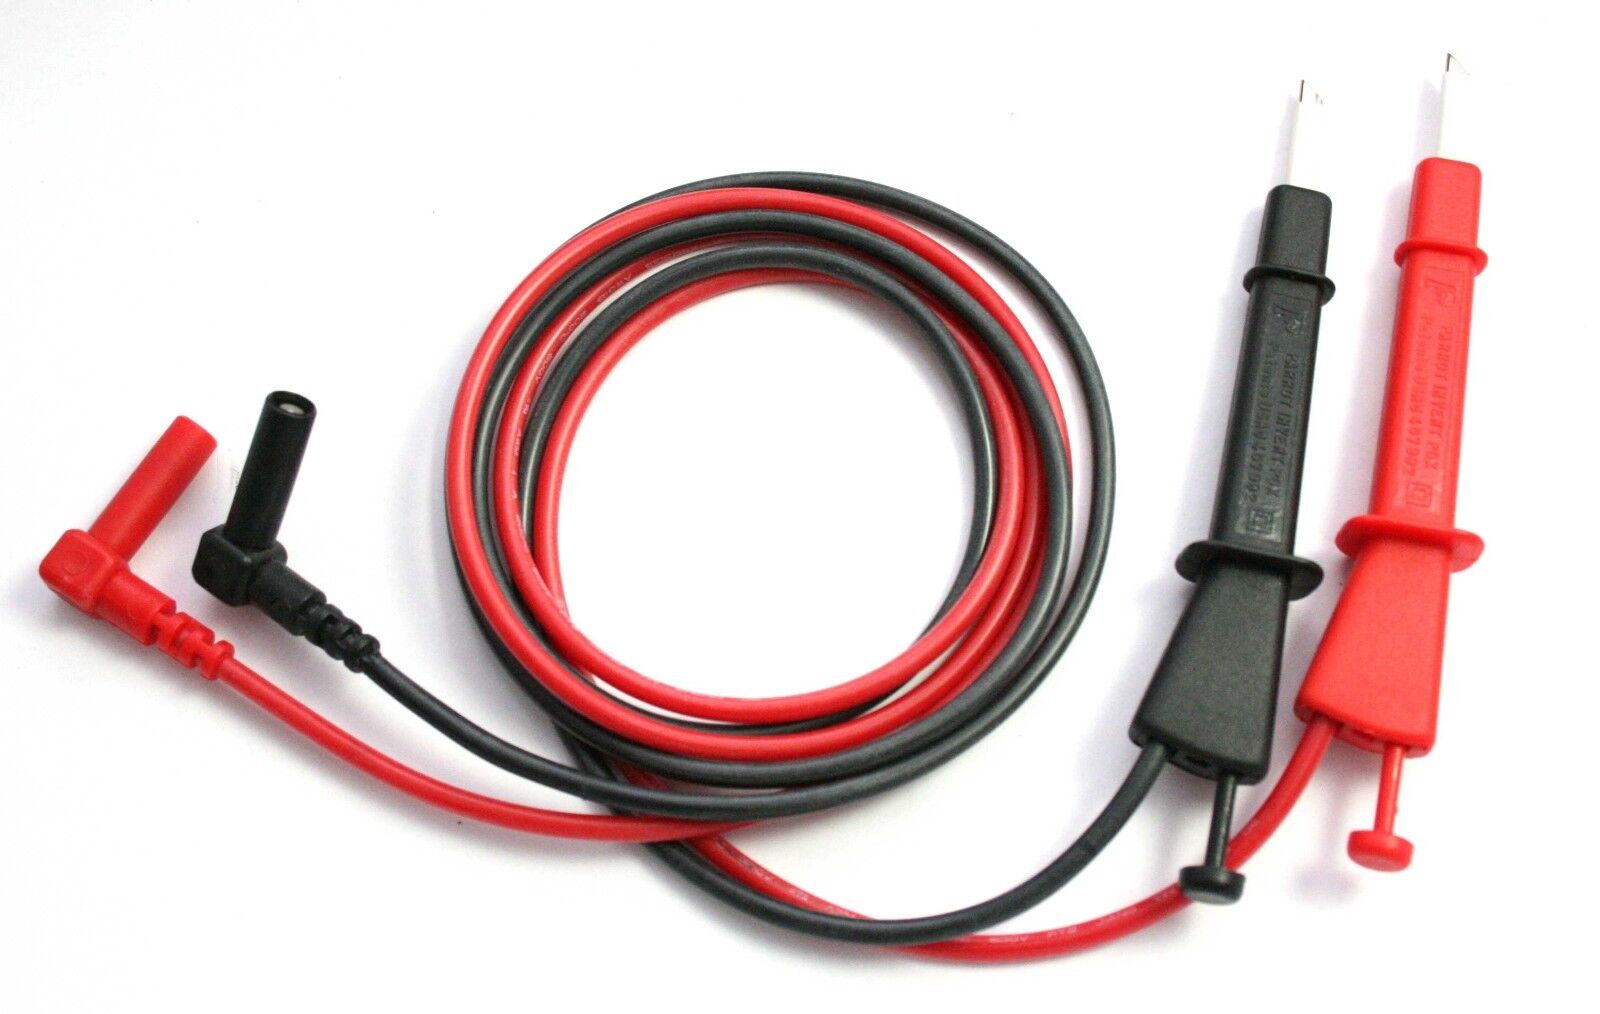 Set of Parrot 2mm PCX 1m Test Leads, 600V Cat III with Banana Plugs